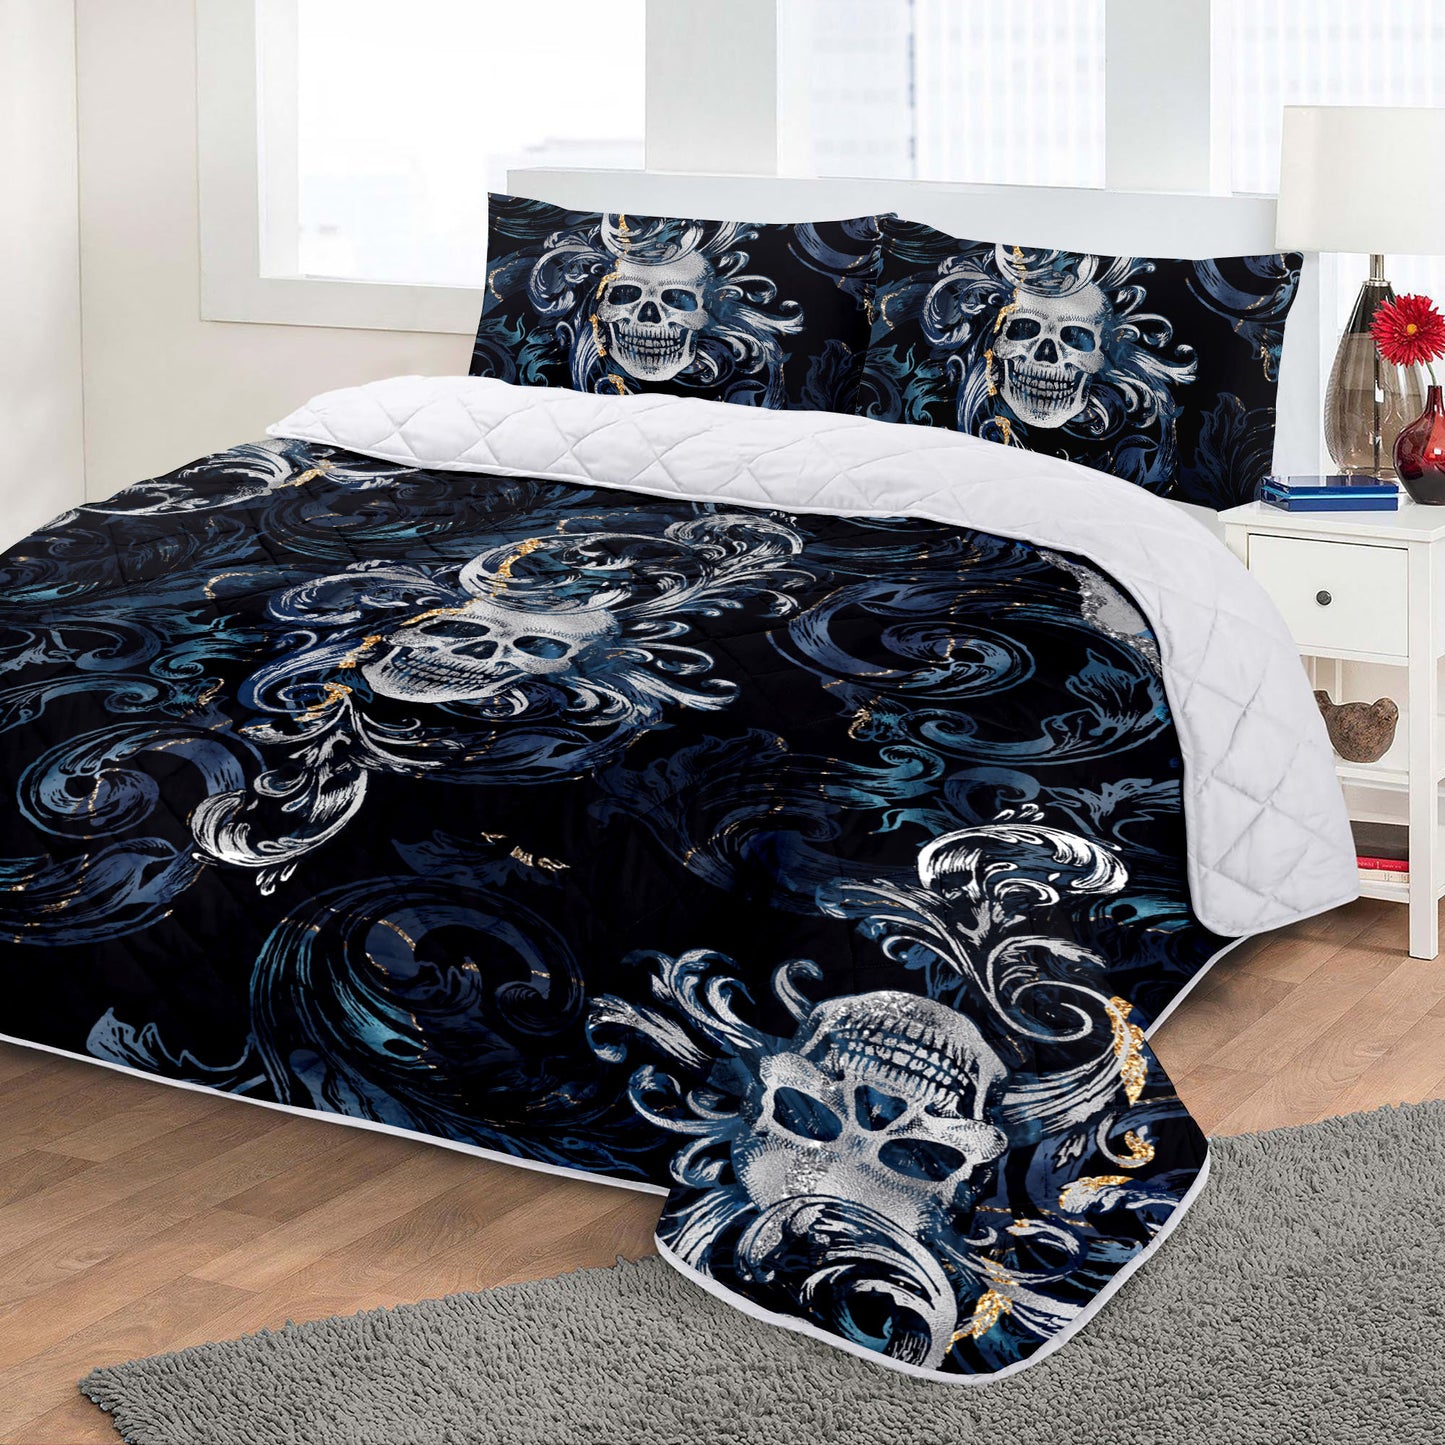 Baroque Skull Gothic Eccentric Personalised designs Thin quilt • bedspread • blanket for your bedroom decoration